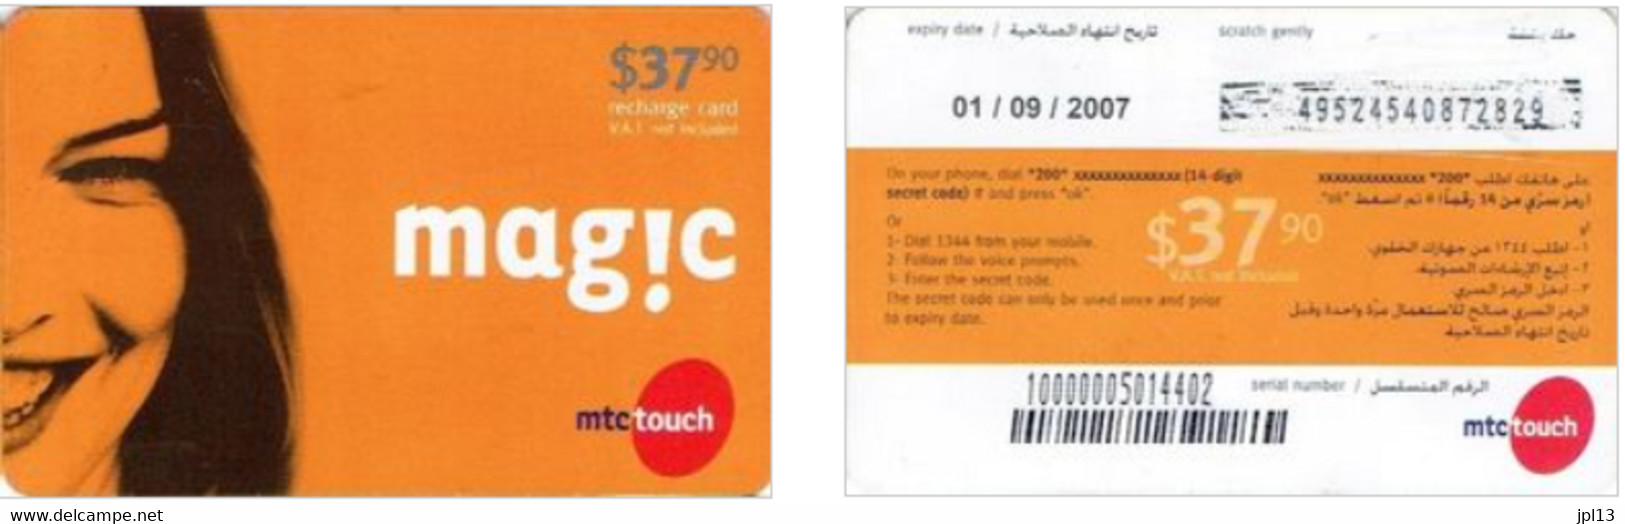 Recharge GSM - Liban - MTC Touch - Magic - Woman $37,90, Exp. 02/02/2007 - Líbano